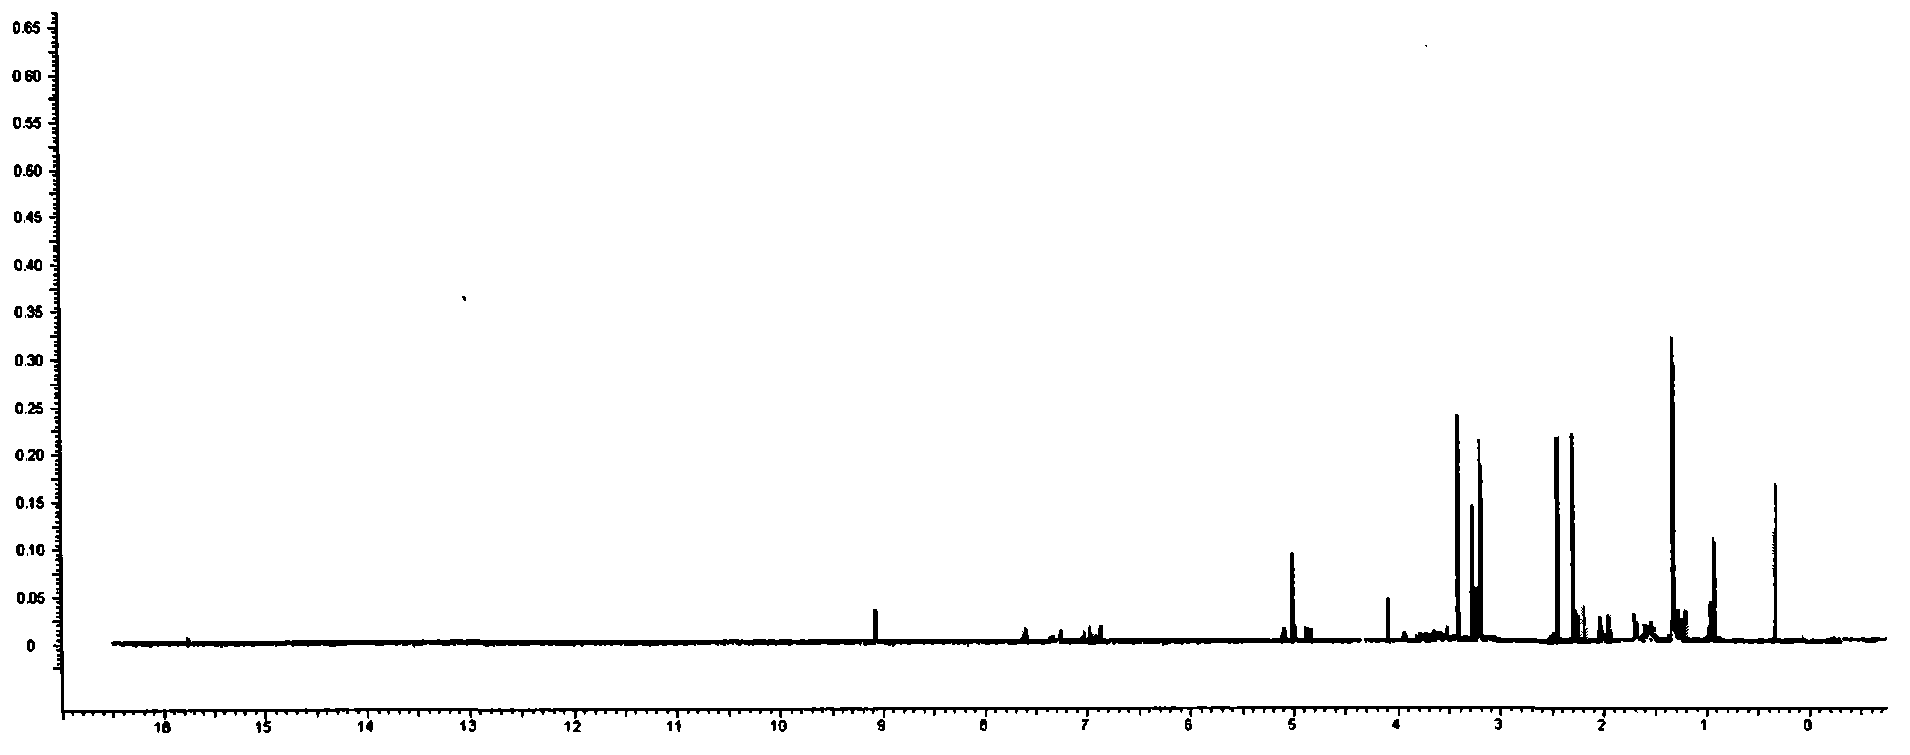 New compound containing anthracycline structure as well as preparation method and application of new compound containing anthracycline structure